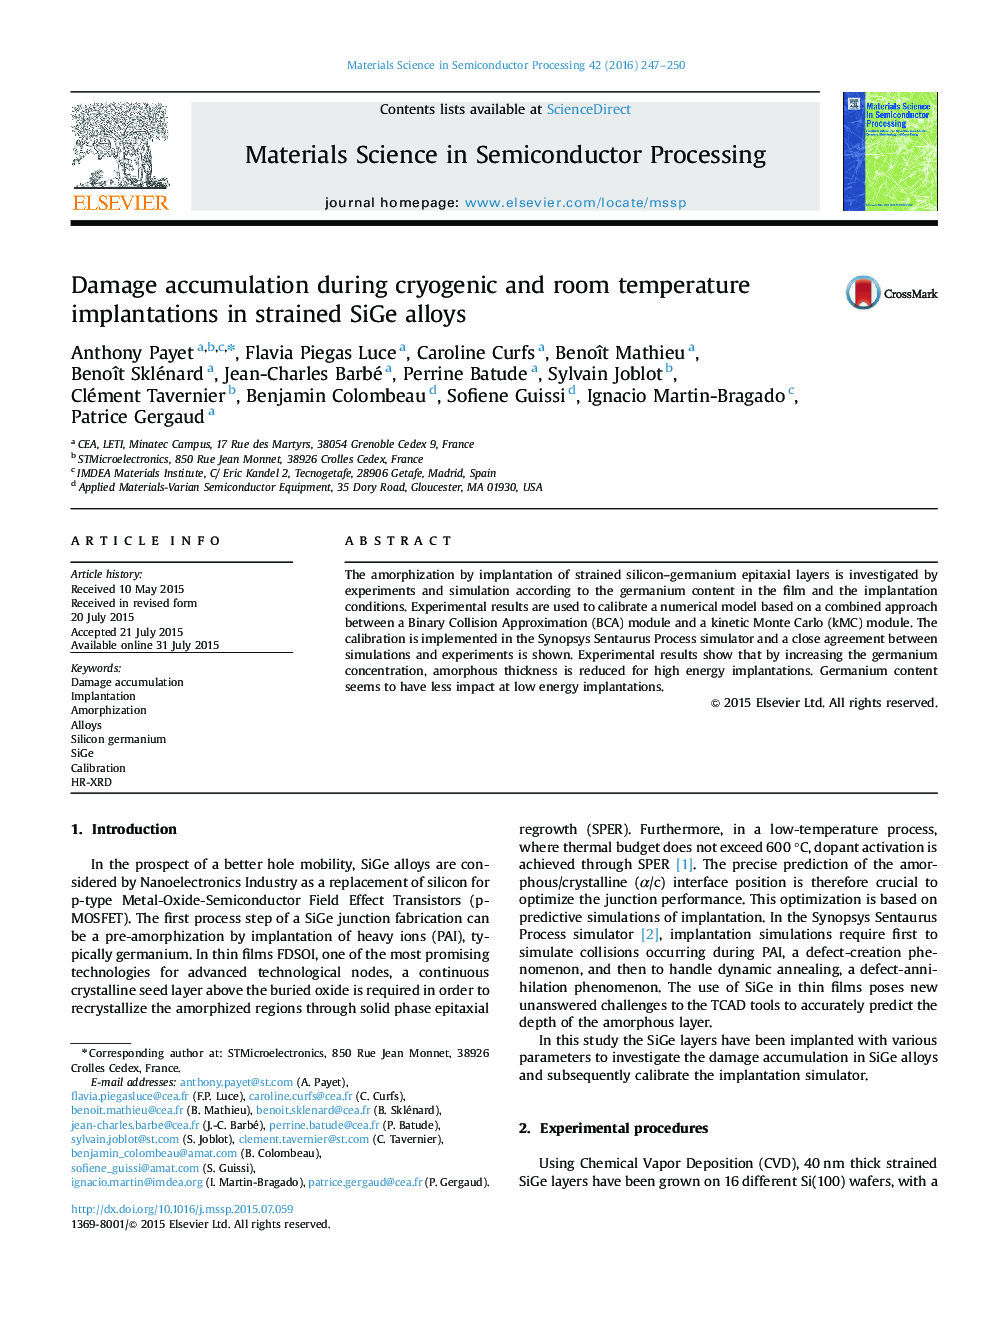 Damage accumulation during cryogenic and room temperature implantations in strained SiGe alloys